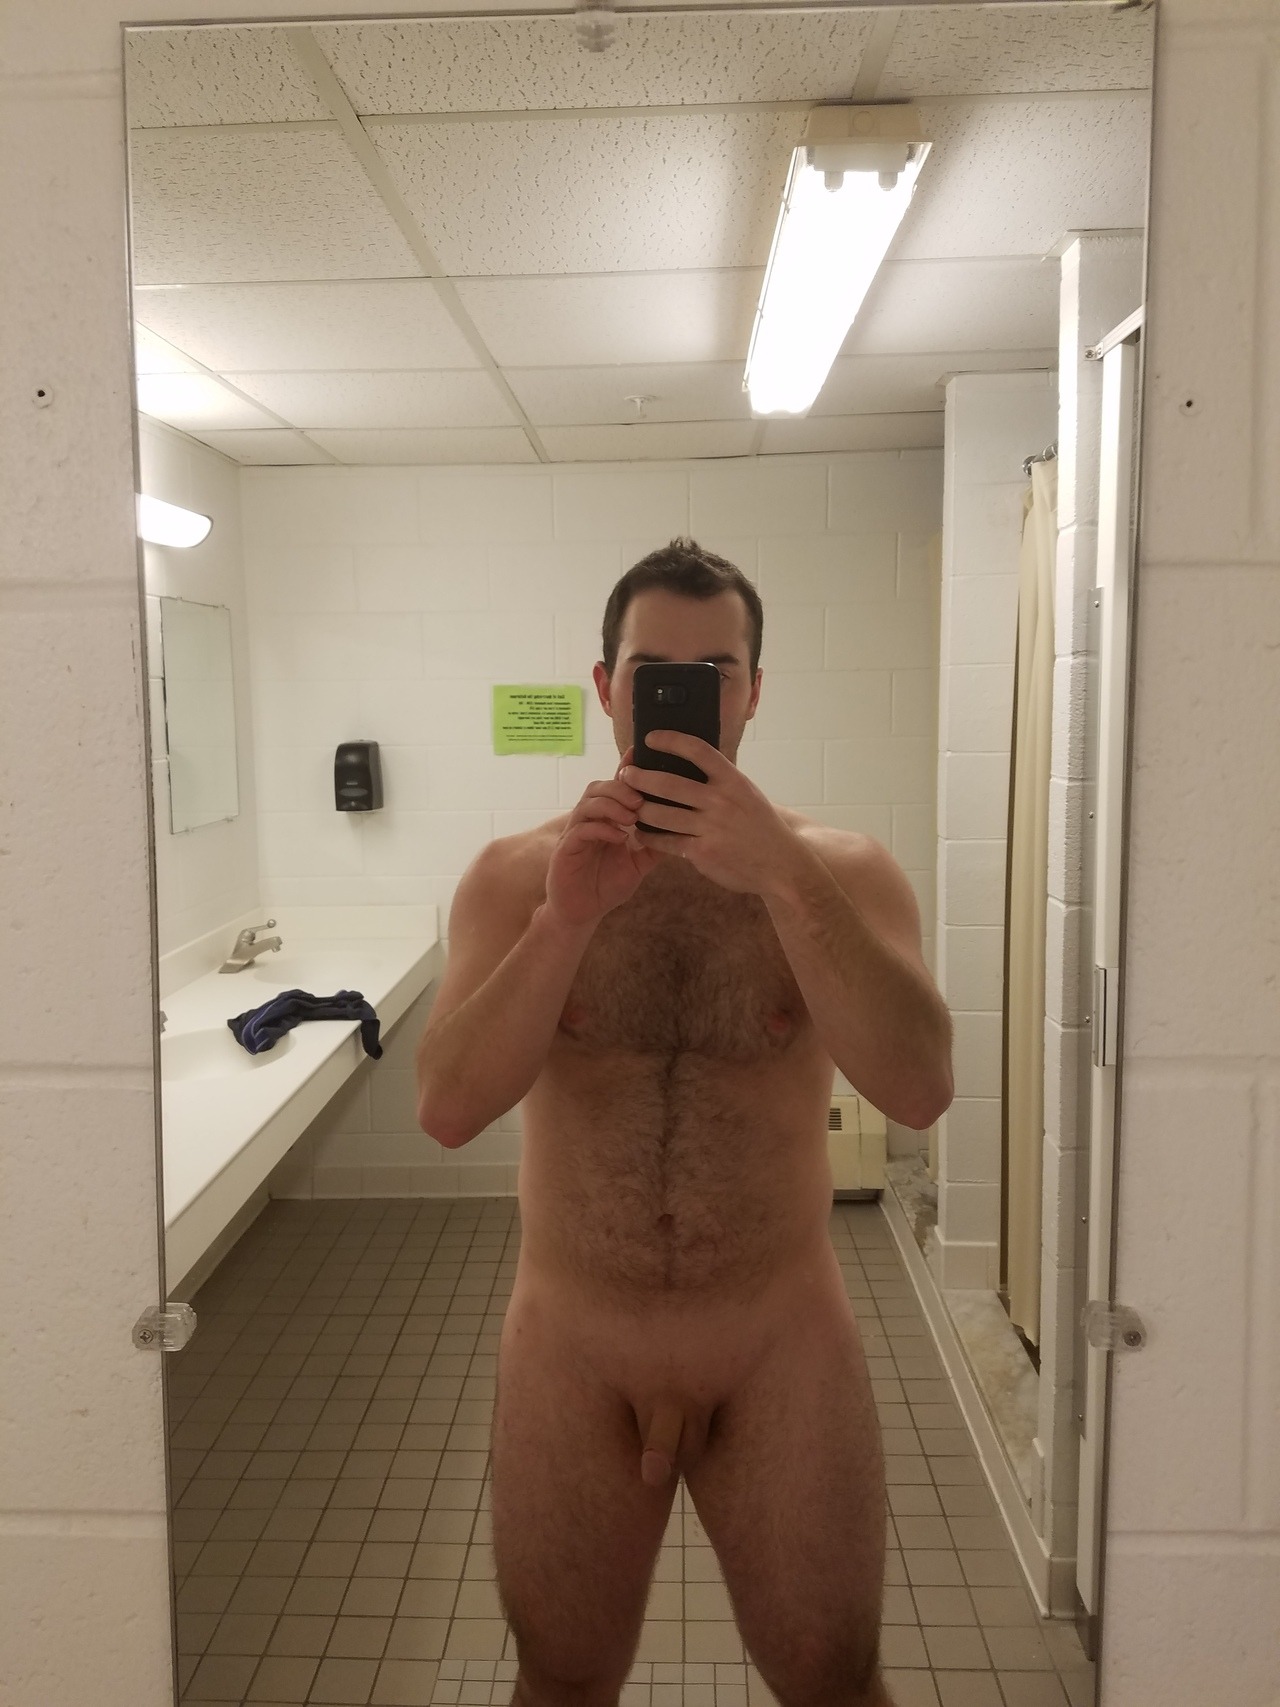 tinydickjock:  Hot small dick frat boy.  6 feet 185 pounds. 5 inches hard Thanks